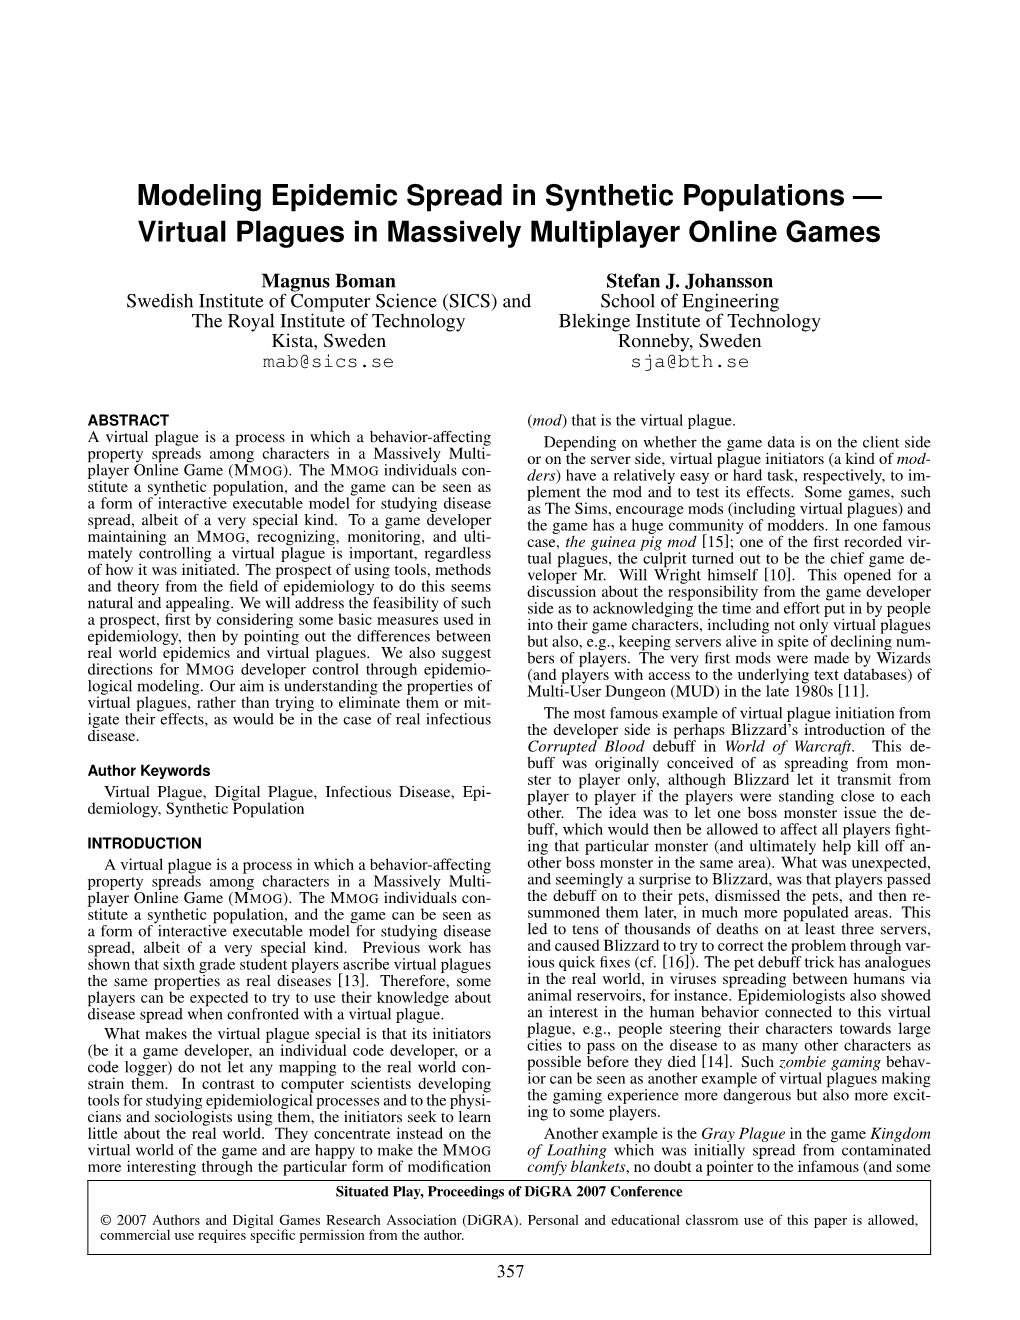 Modeling Epidemic Spread in Synthetic Populations — Virtual Plagues in Massively Multiplayer Online Games